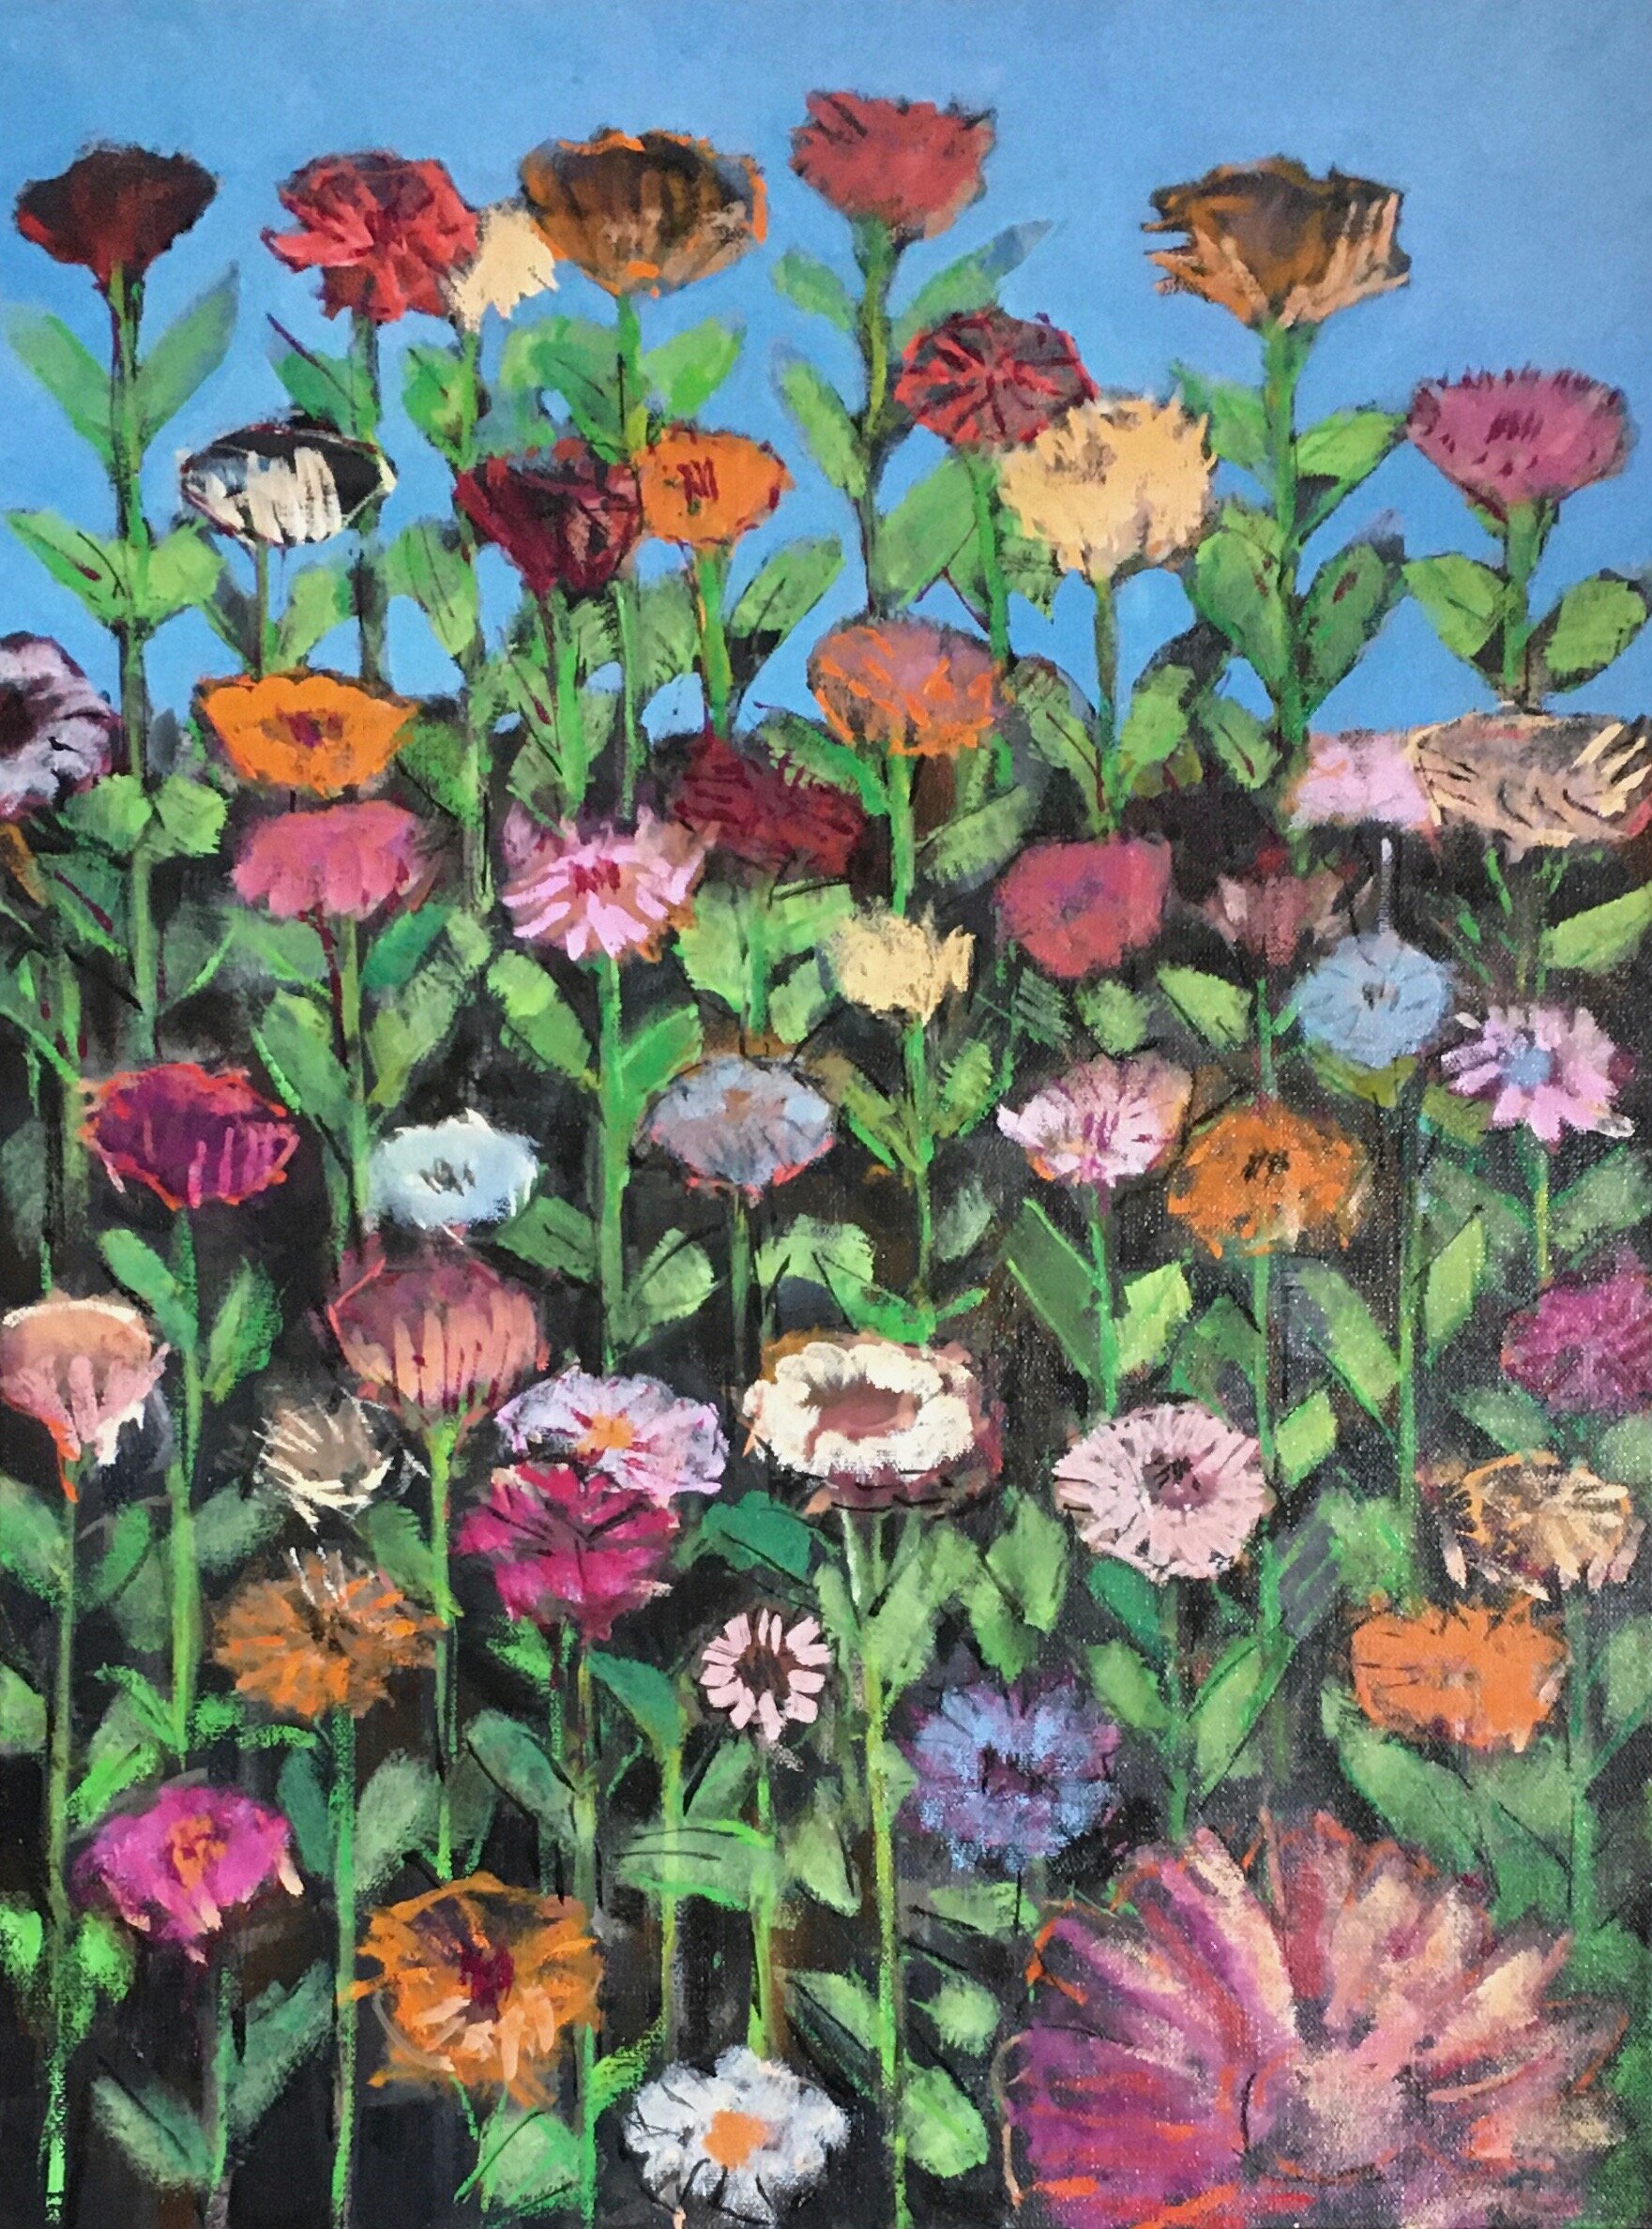 Zinnia Patch #3, Oil on Canvas, 18x24 inches, 2019